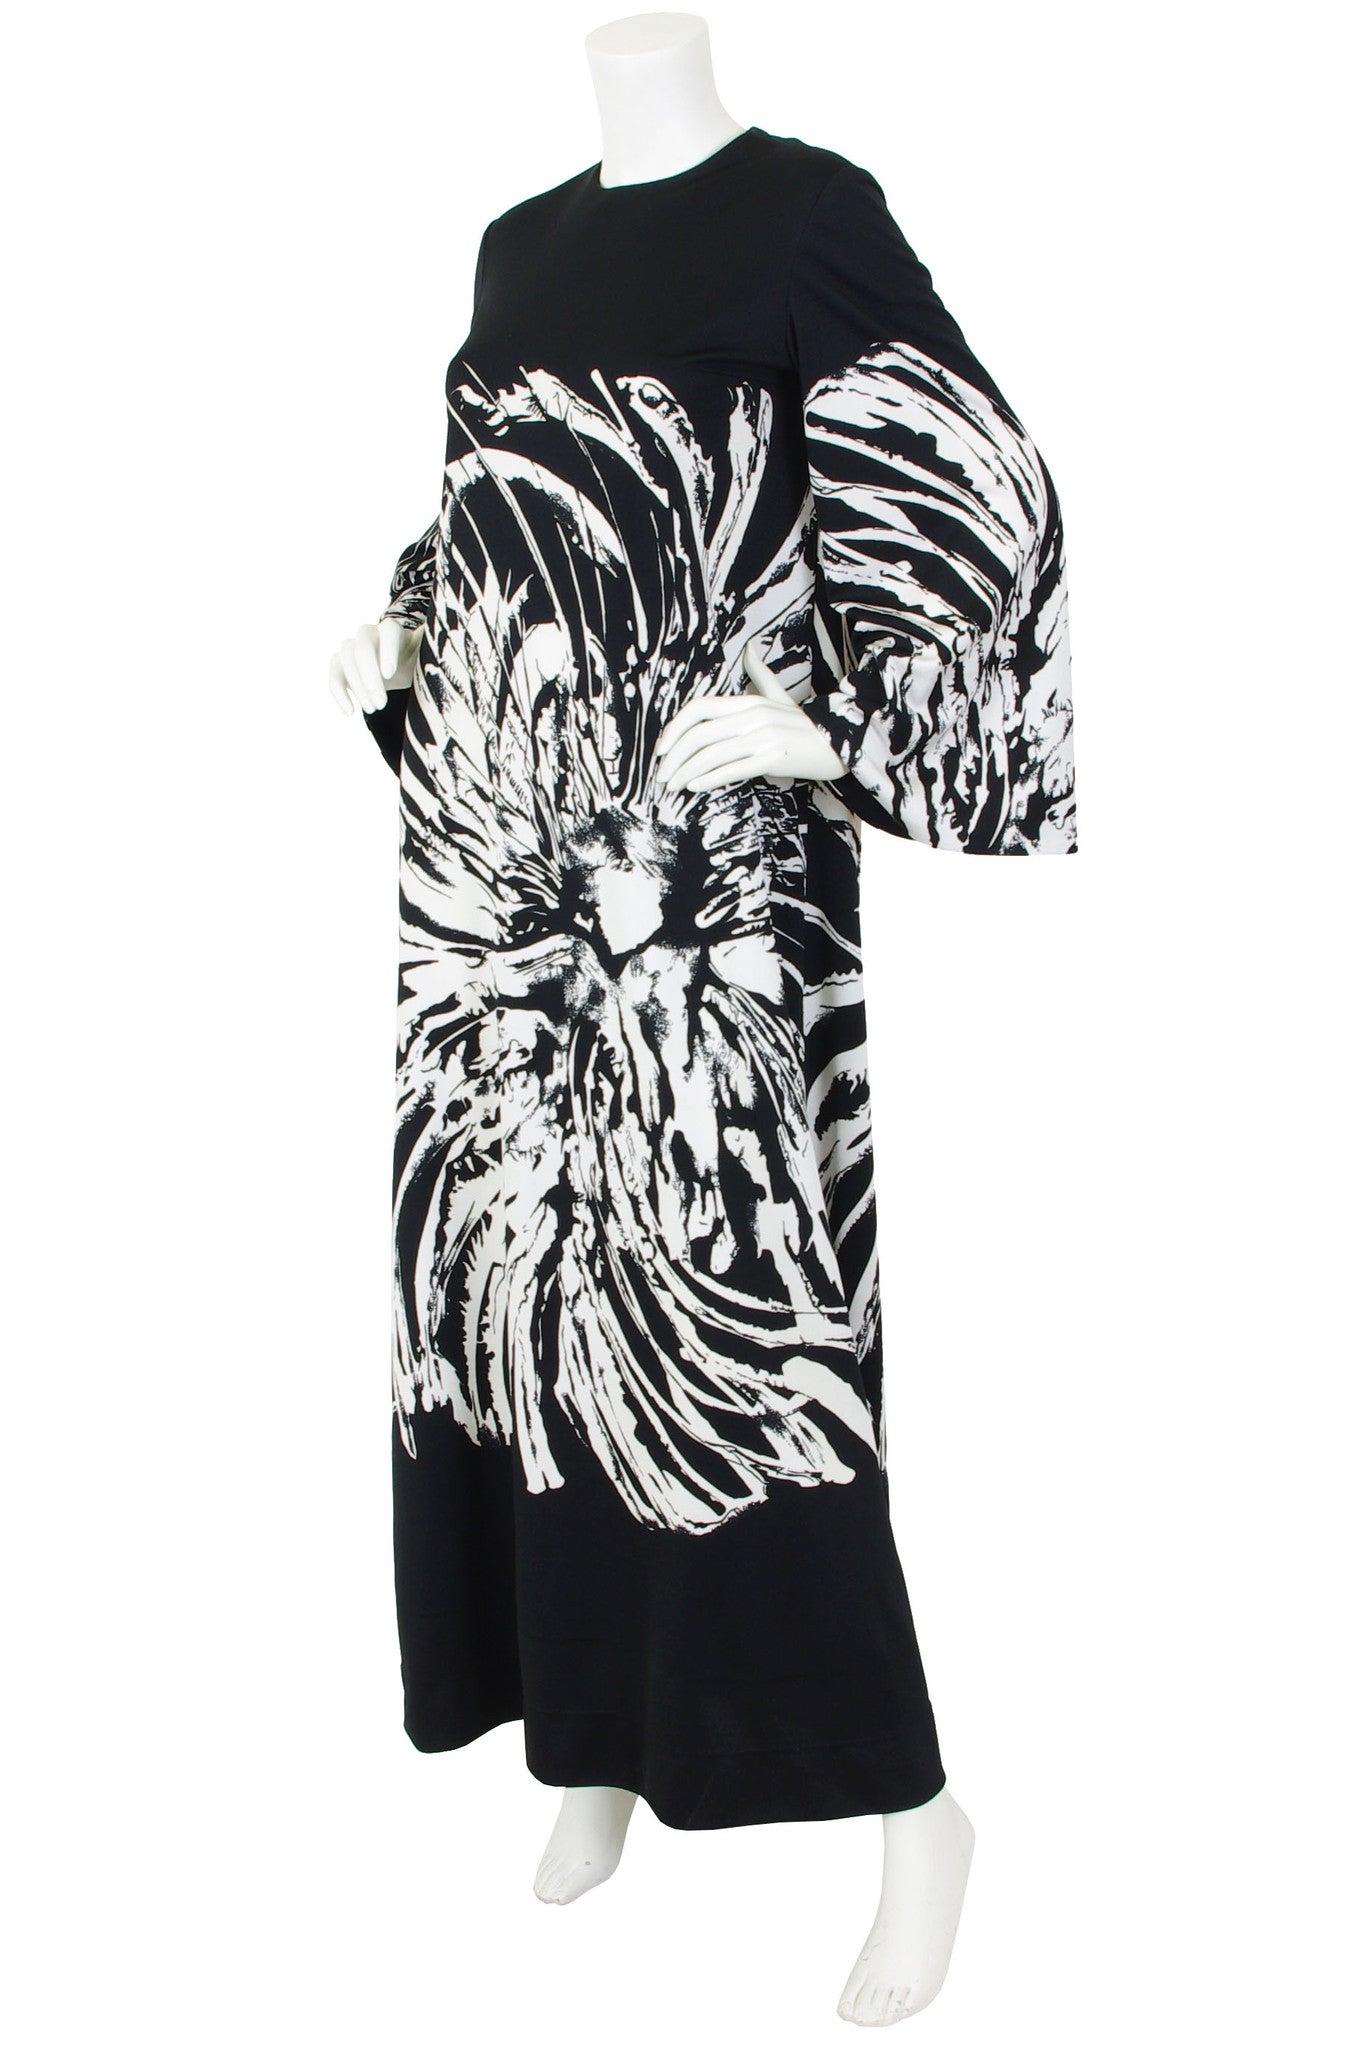 1970s Abstract Black and White Jersey Caftan Dress